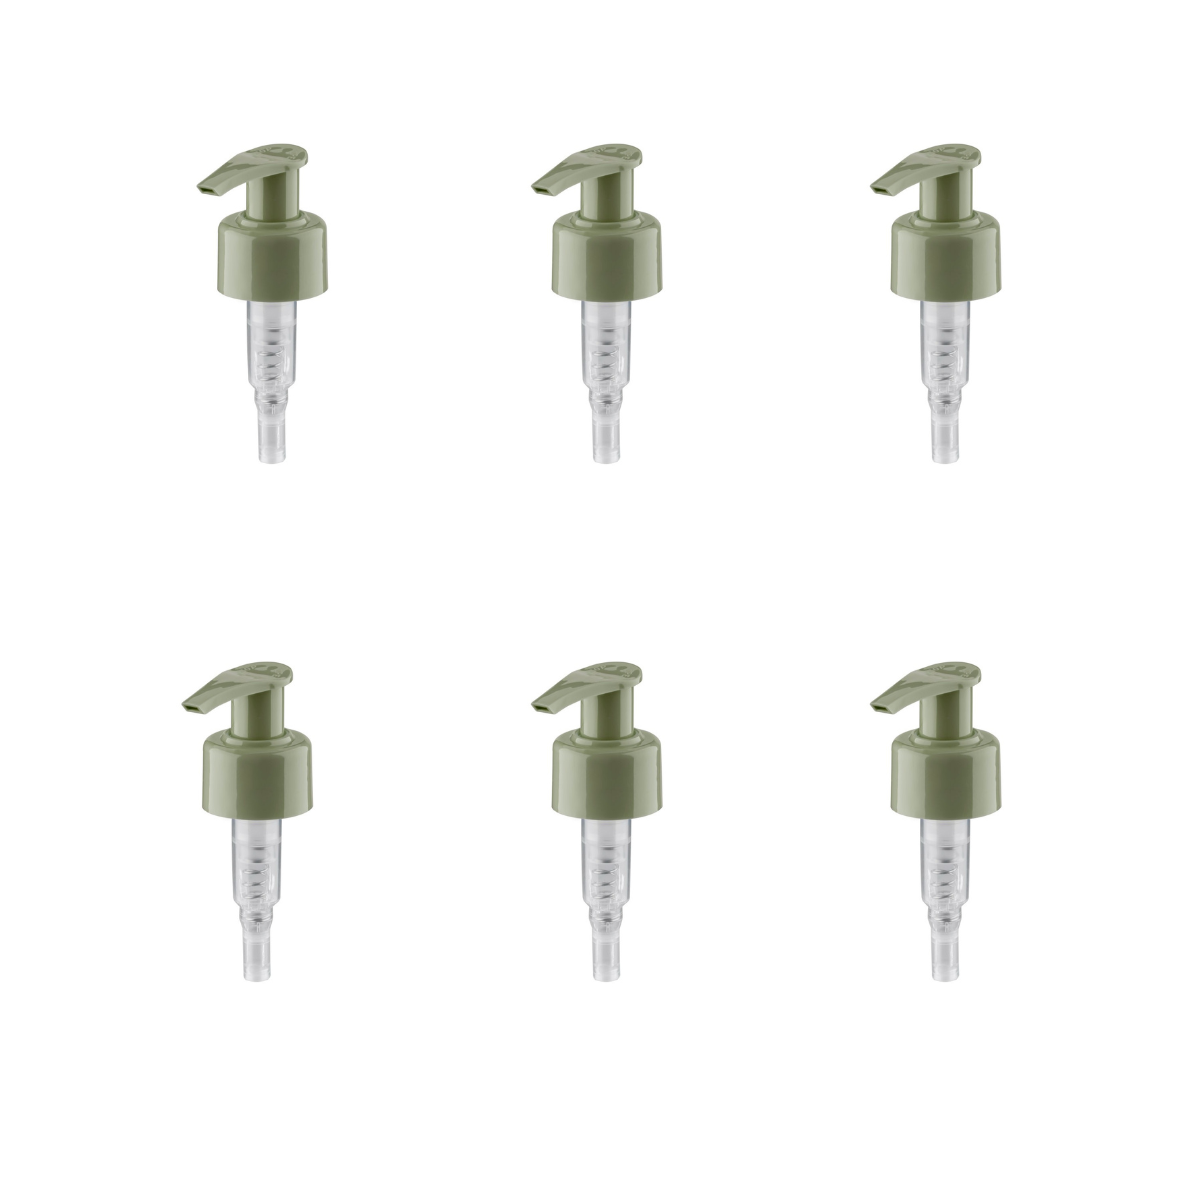 Dompel Pump valves, color green amazonia, thread 28/410, made with stainless steel springs and glass balls, Model 303-A1. (Pump heads only, bottles not included) - depilcompany